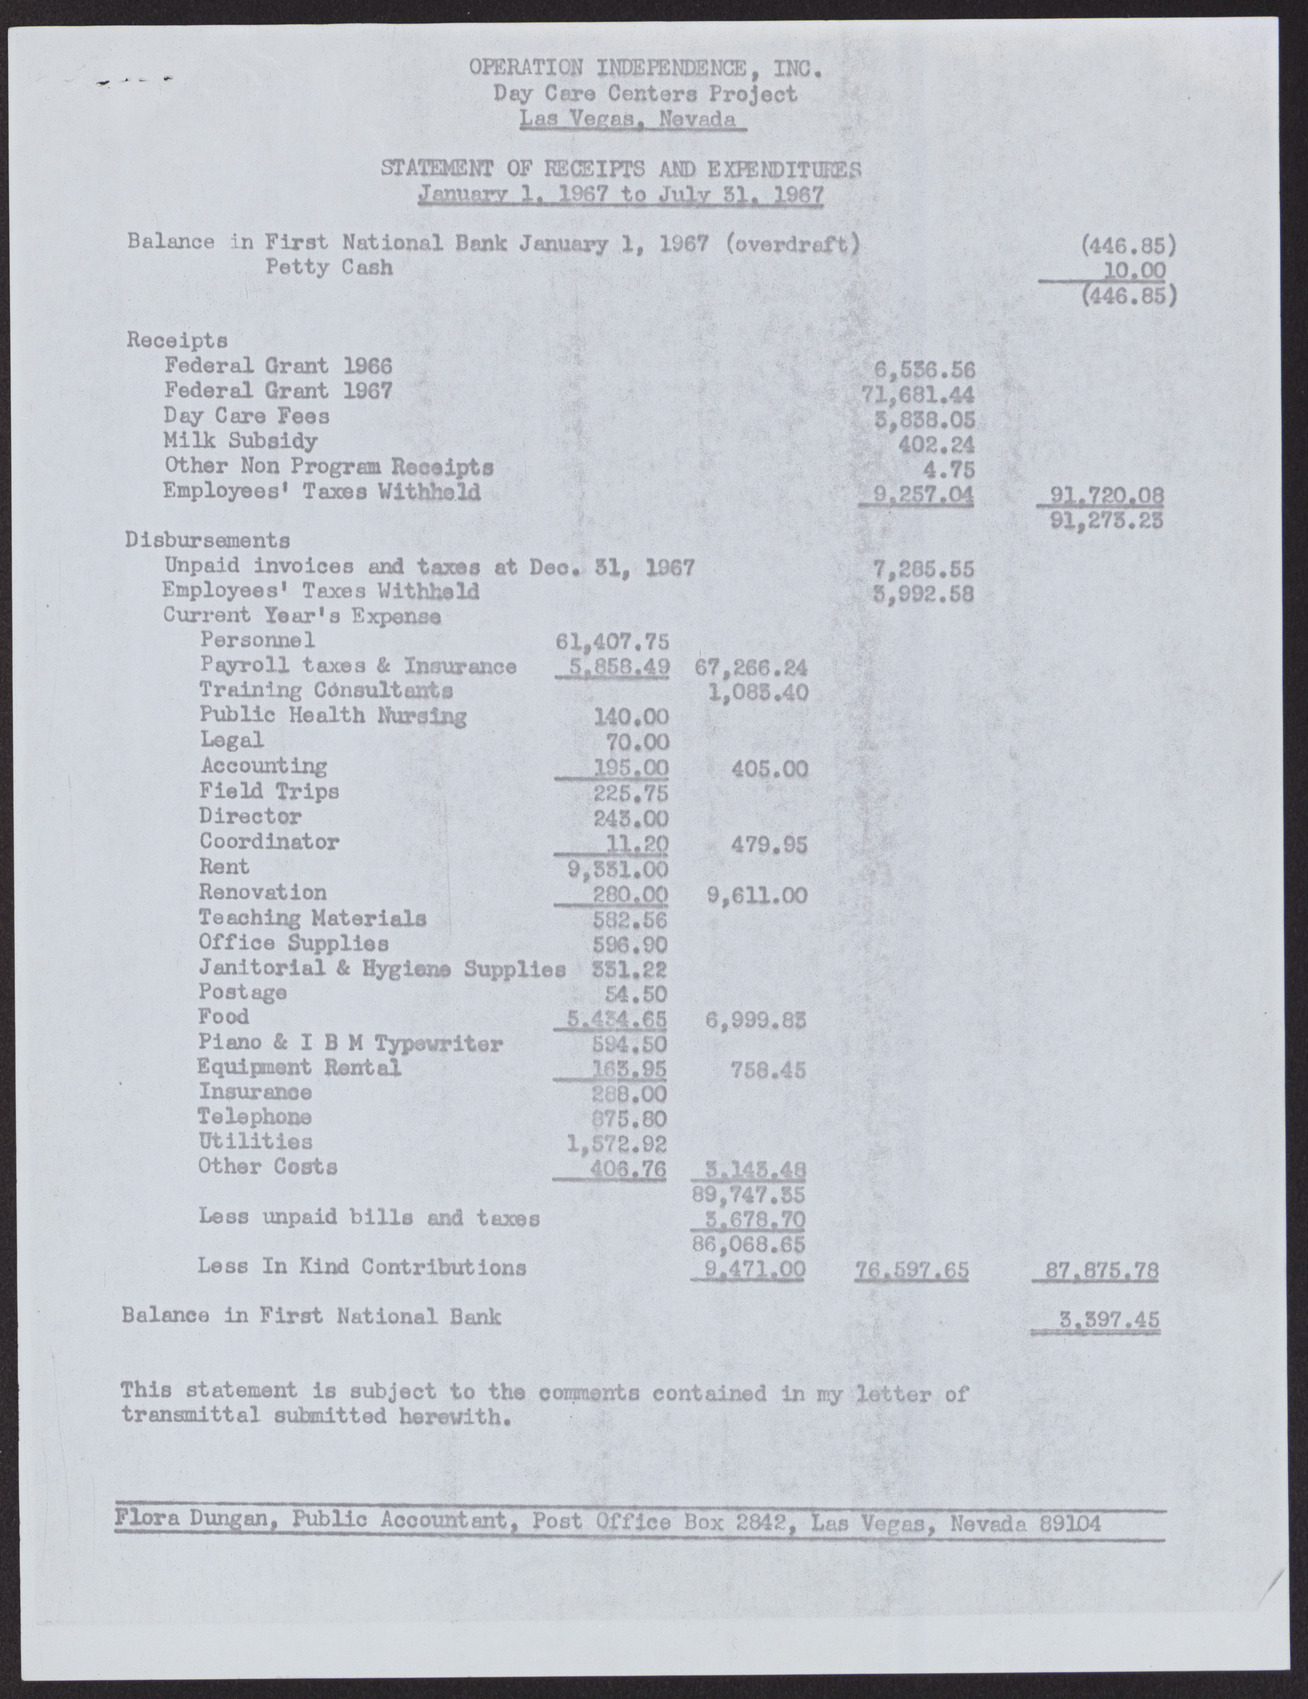 Letter from Flora Dungan and accompanying statements of Receipts and Expenditures and Budgeted and Actual Expenditures (5 pages), August 9, 1967, page 5